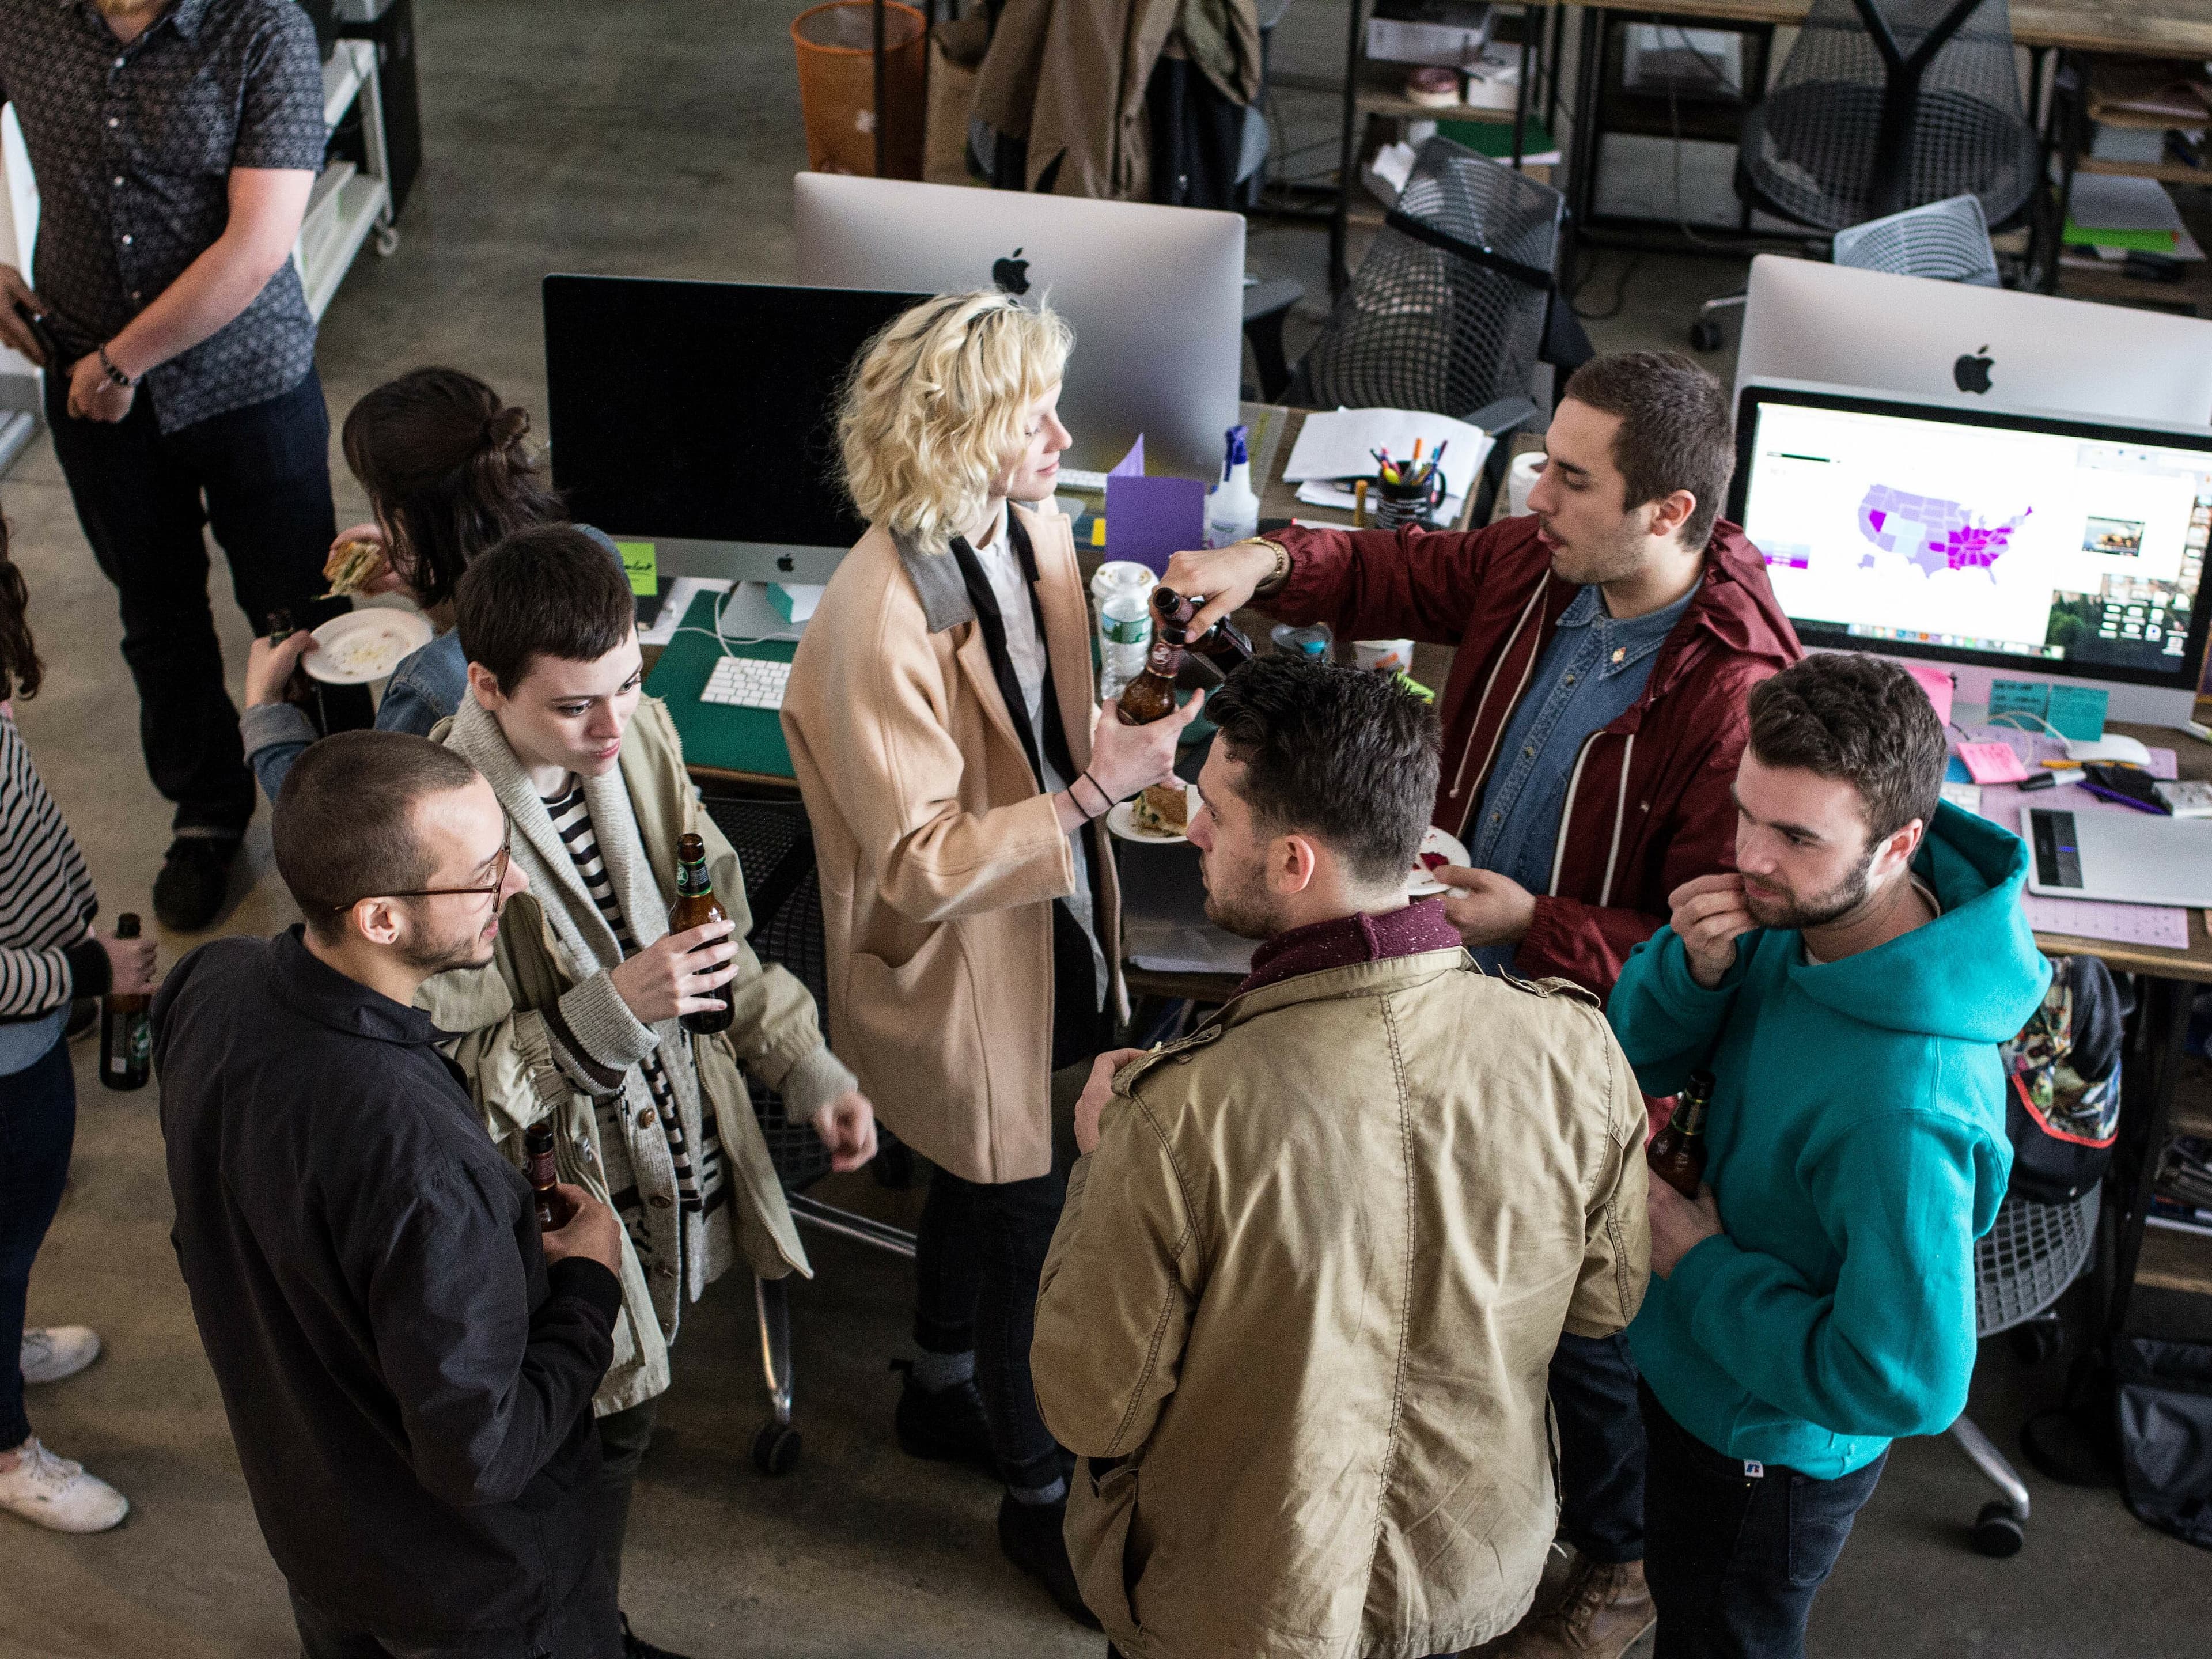 A group of people gather in an office environment, drinking and socializing near a couple of desks with iMac computers. Some are holding drinks, and one person appears to be pouring a drink for another. The atmosphere looks casual and friendly.